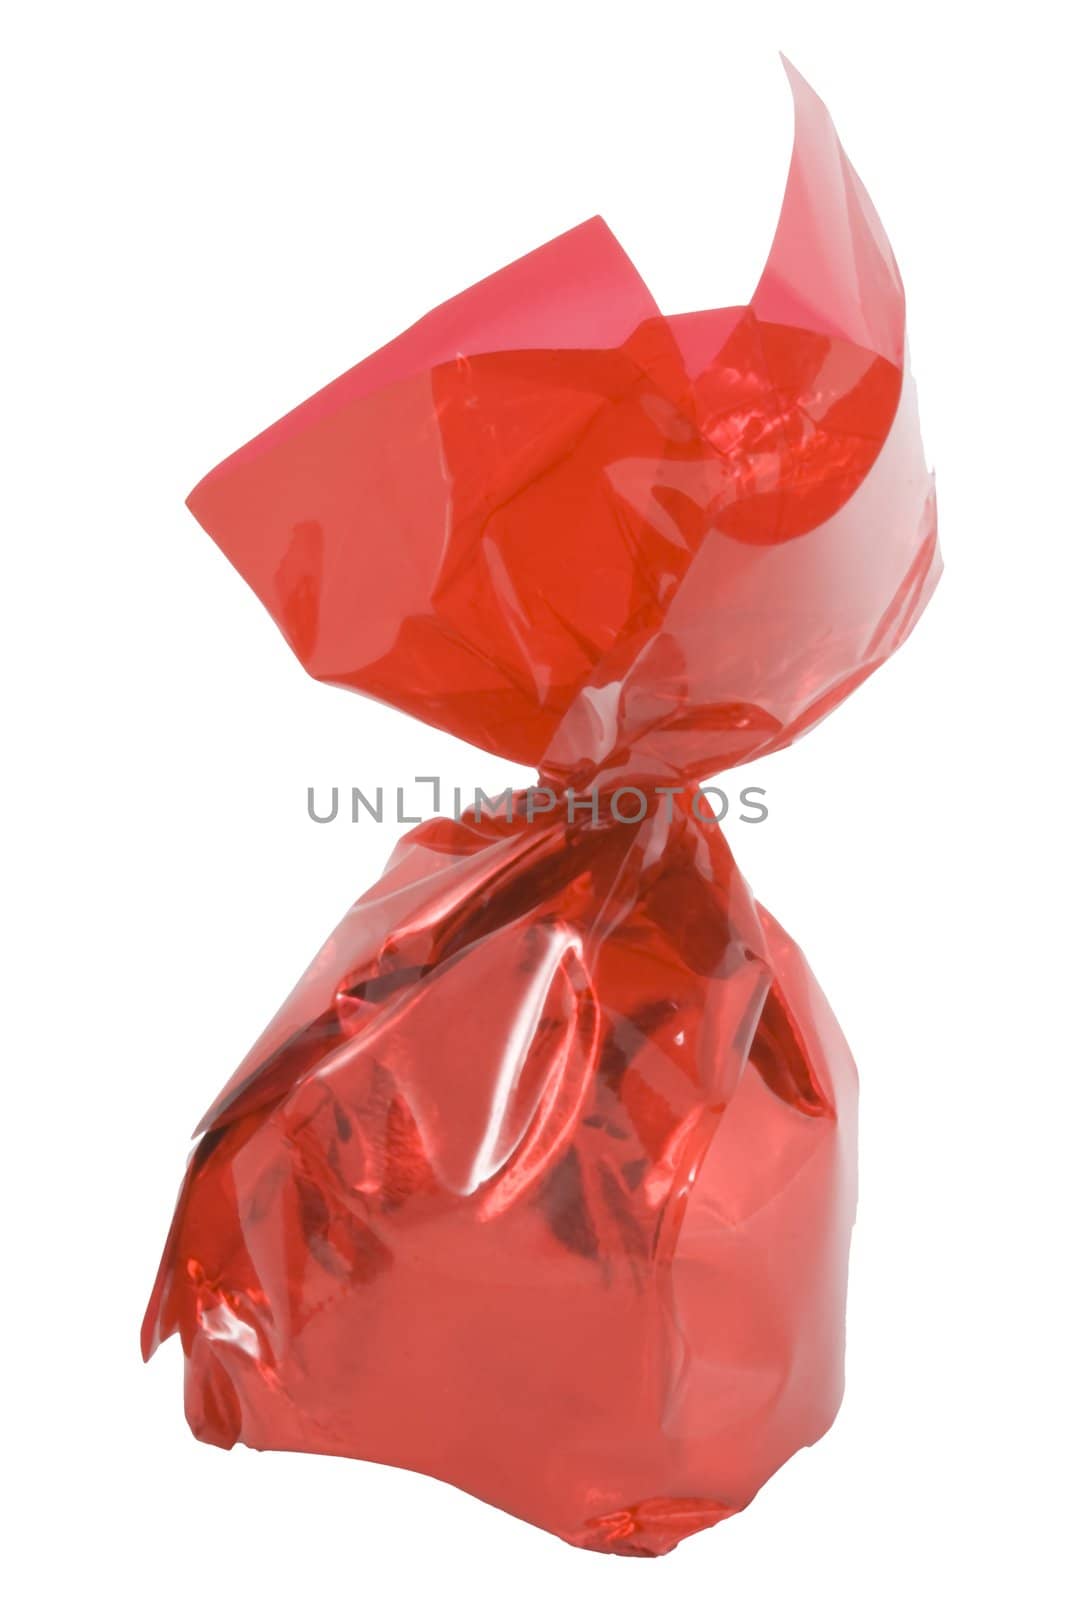 a piece of sweets in a red wrapper - confectionery - close up